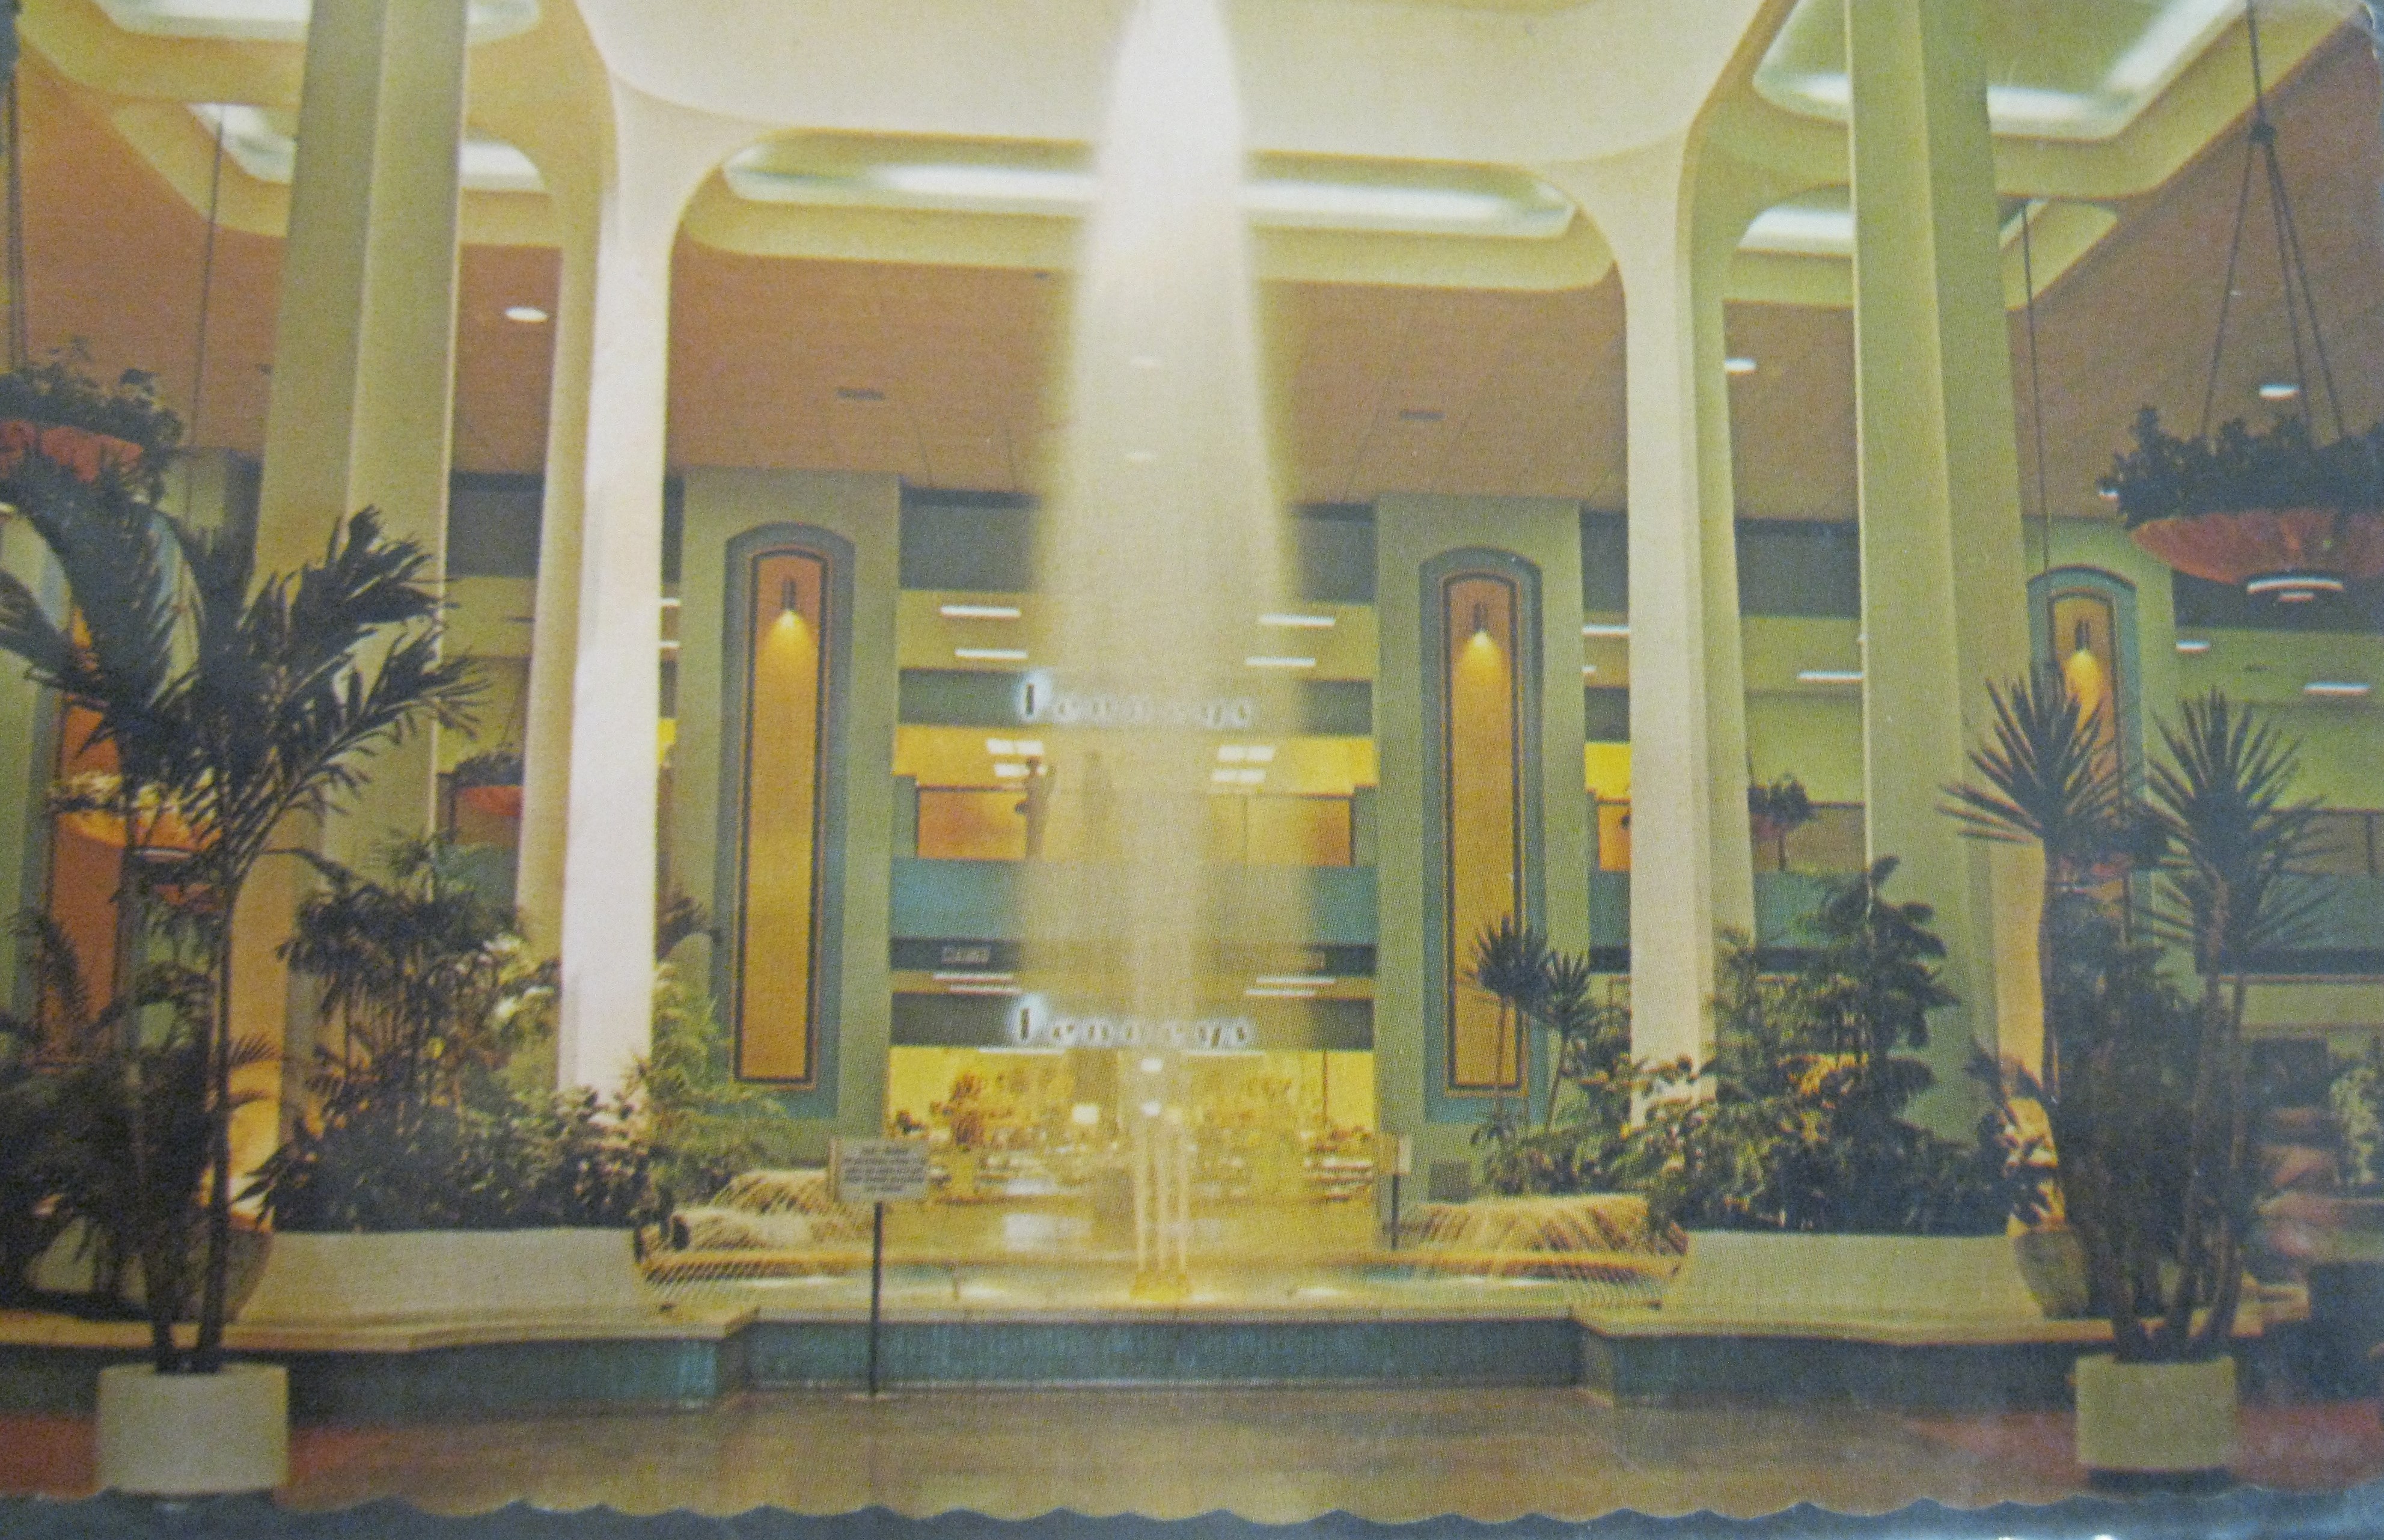 Photo of one of the giant fountains inside of the Cinderella City shopping mall. The fountain is flanked on each side by a large white structural column that reaches a very high ceiling that looks to have large sky lights directly above the fountain area. The fountain area is surrounded by large green leafed plants, and there are no people around at the time the photo is being taken.